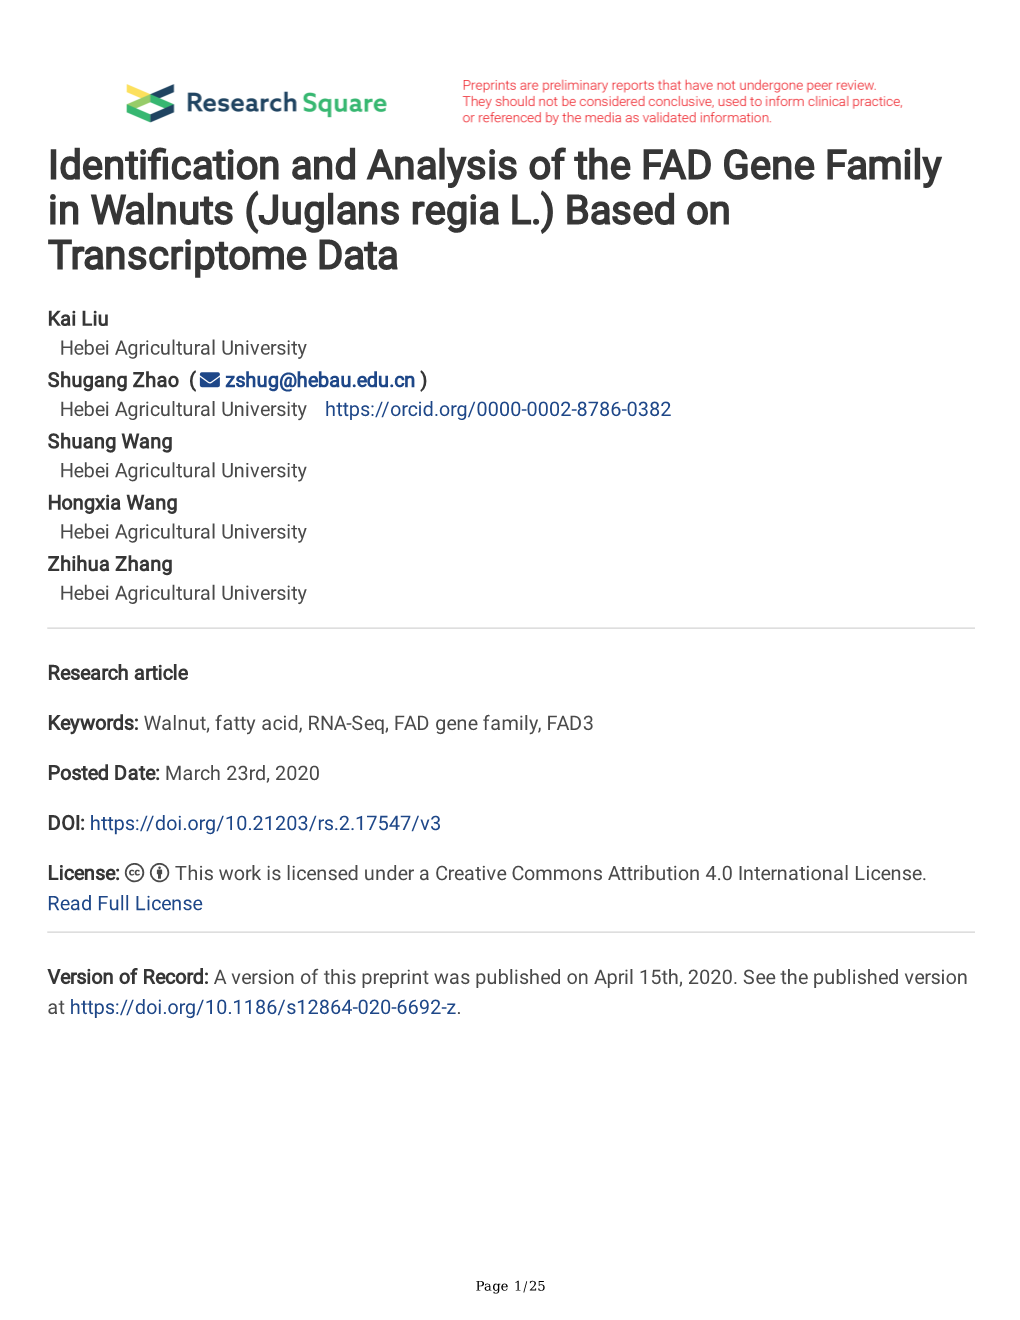 Identification and Analysis of the FAD Gene Family In